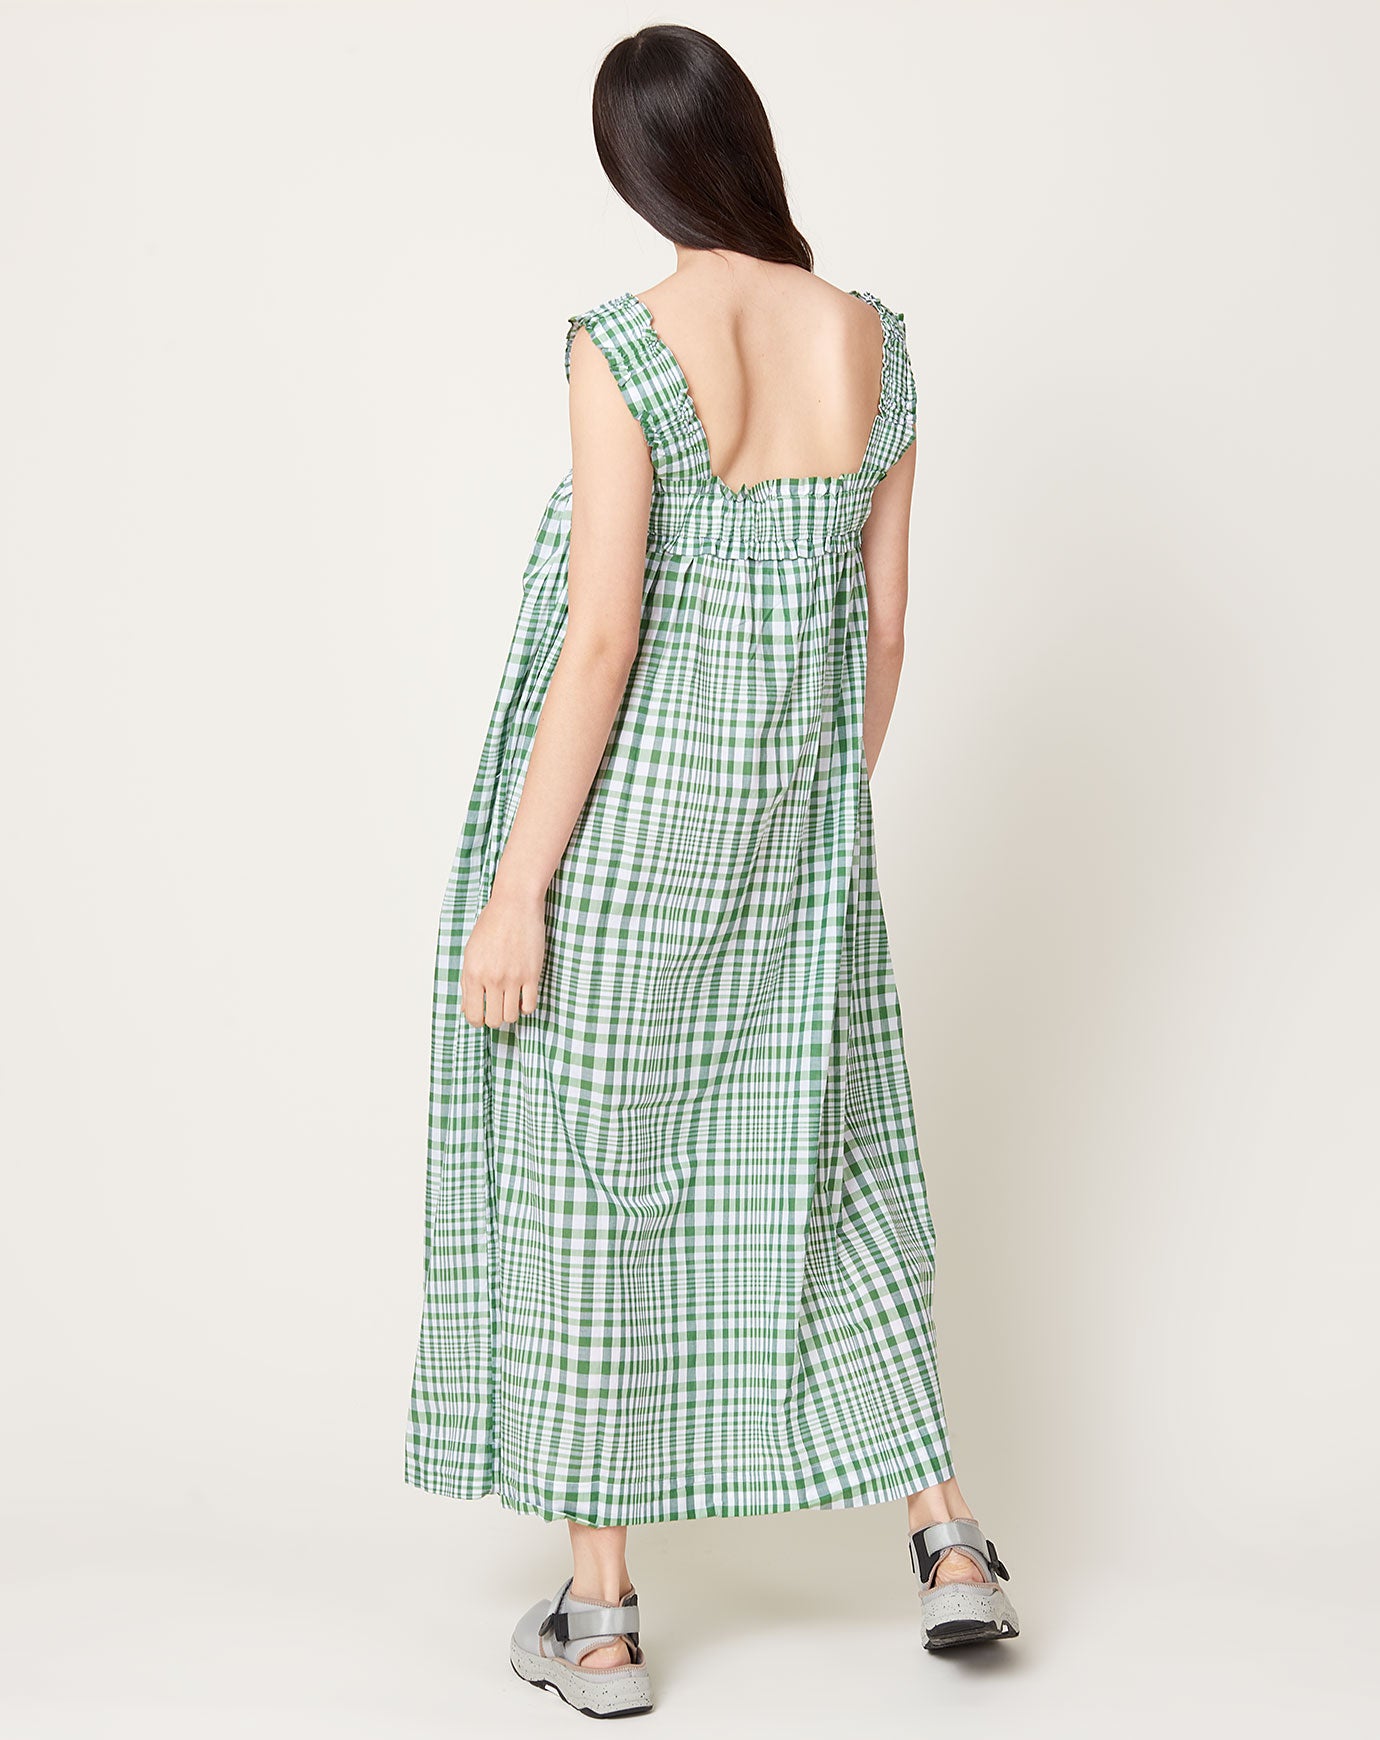 Kowtow Orchard Dress in Field Check